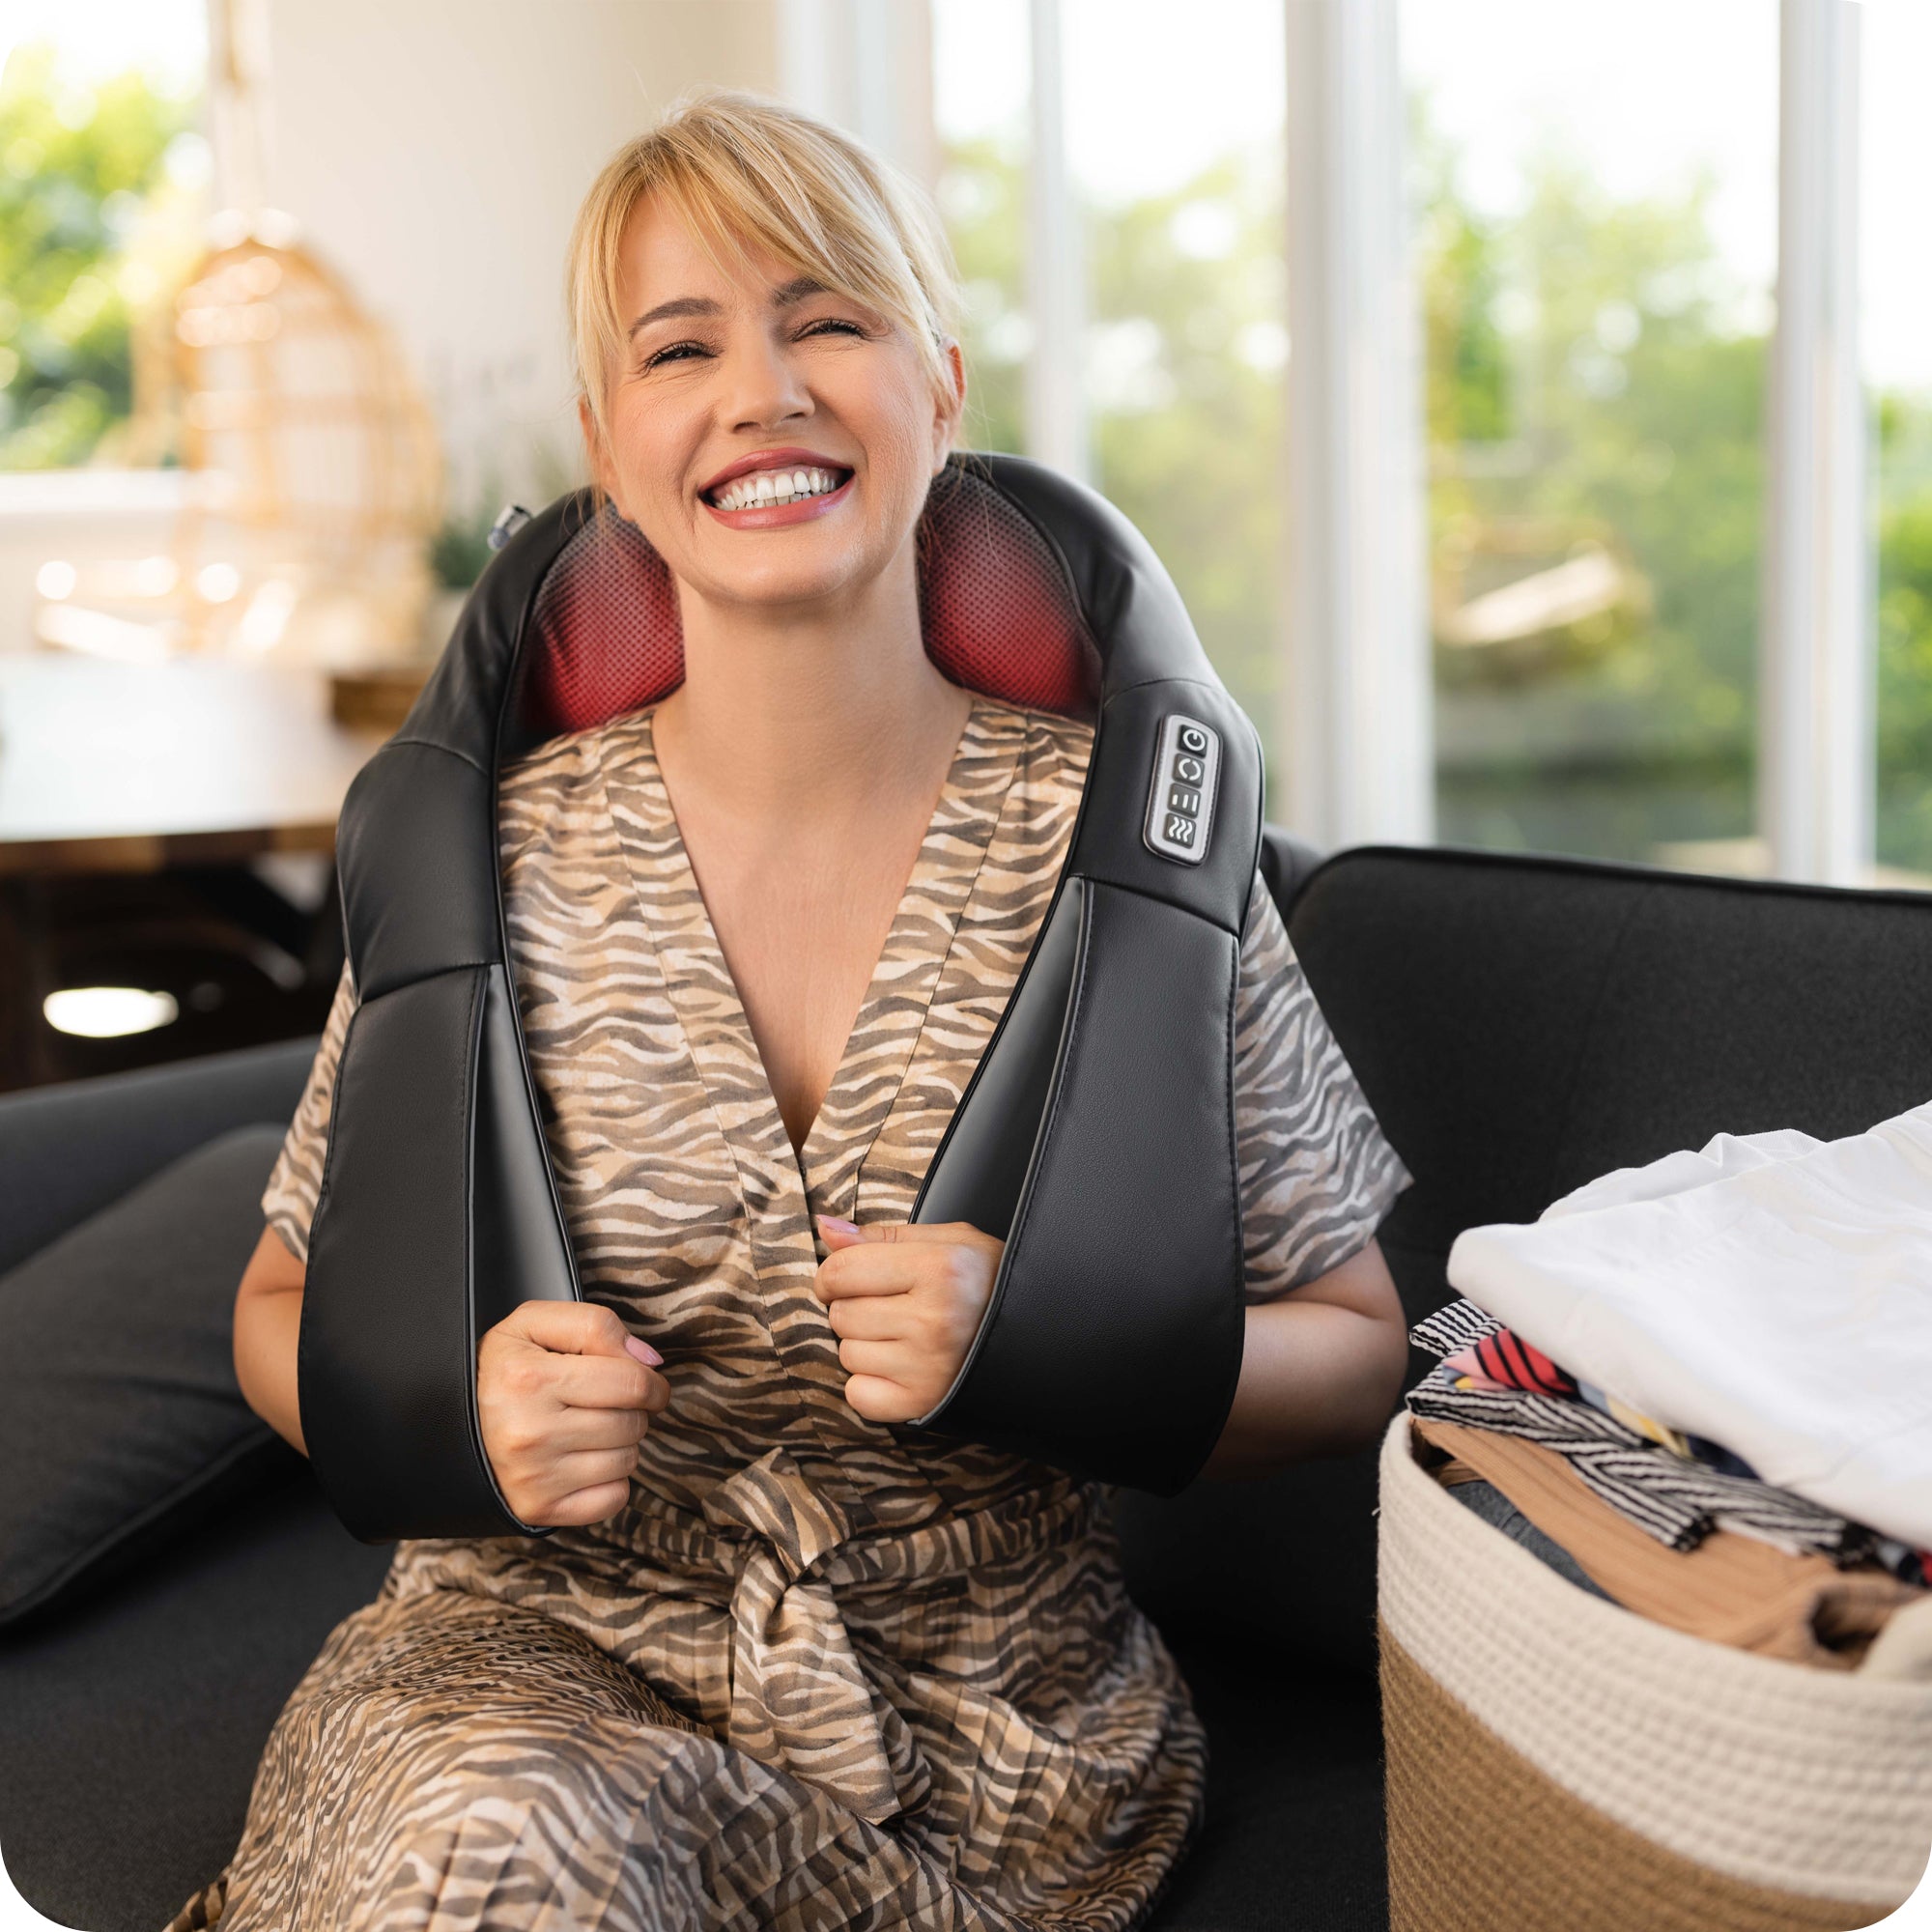 Smiling woman enjoying a relaxing massage with electric massager during a break from chores